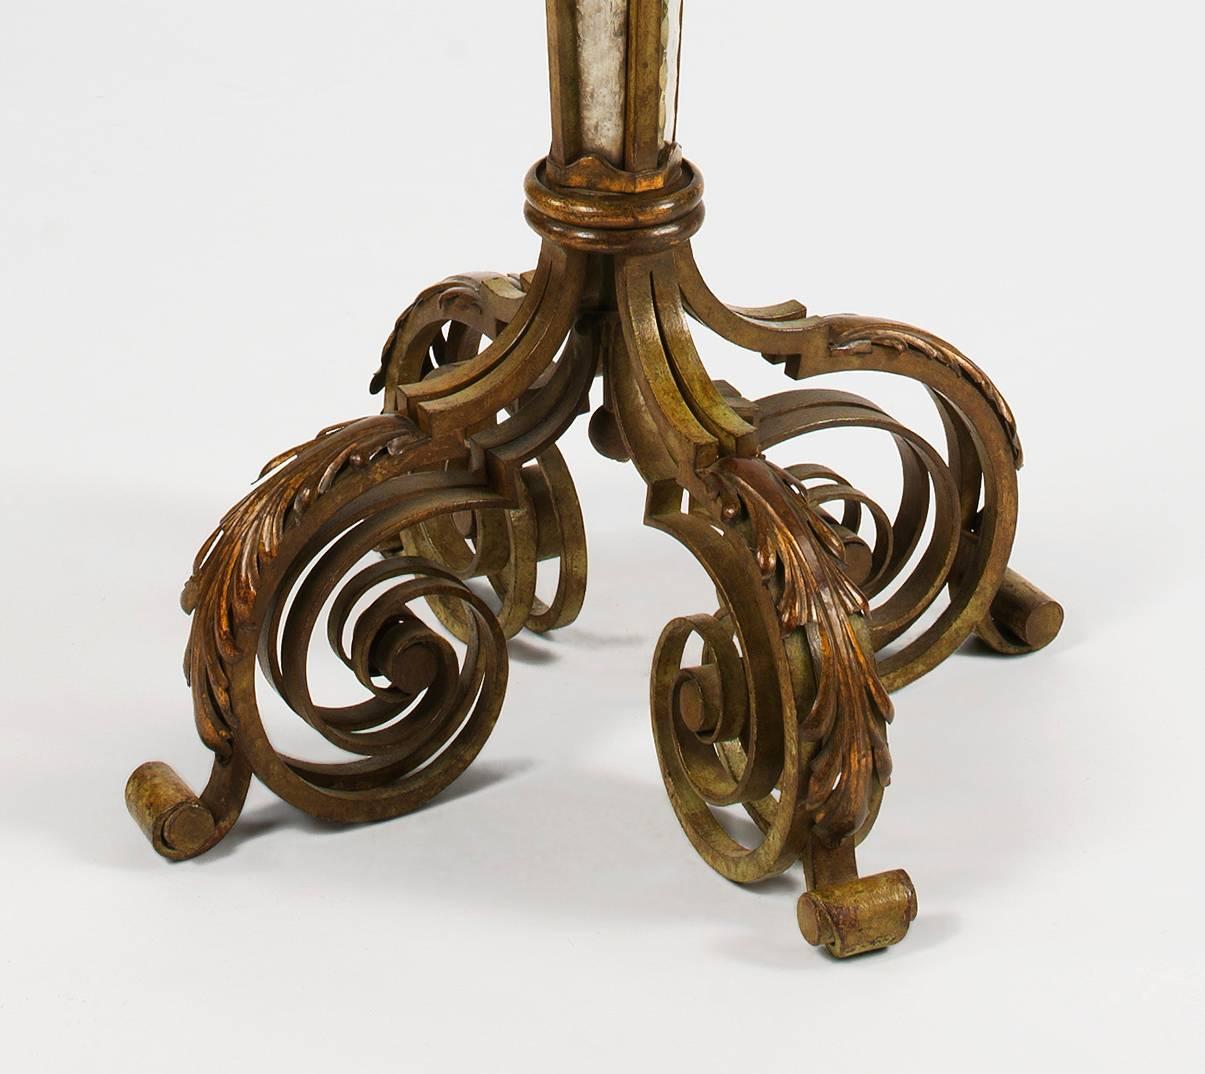 A parcel-gilt wrought iron floor lamp attributed to Serge Roche, inset with four verre églomisé panels by Robert Pansart, surviving in excellent condition.

Serge Roche (1898- 1988) was the greatest exponent of the baroque revival that lasted